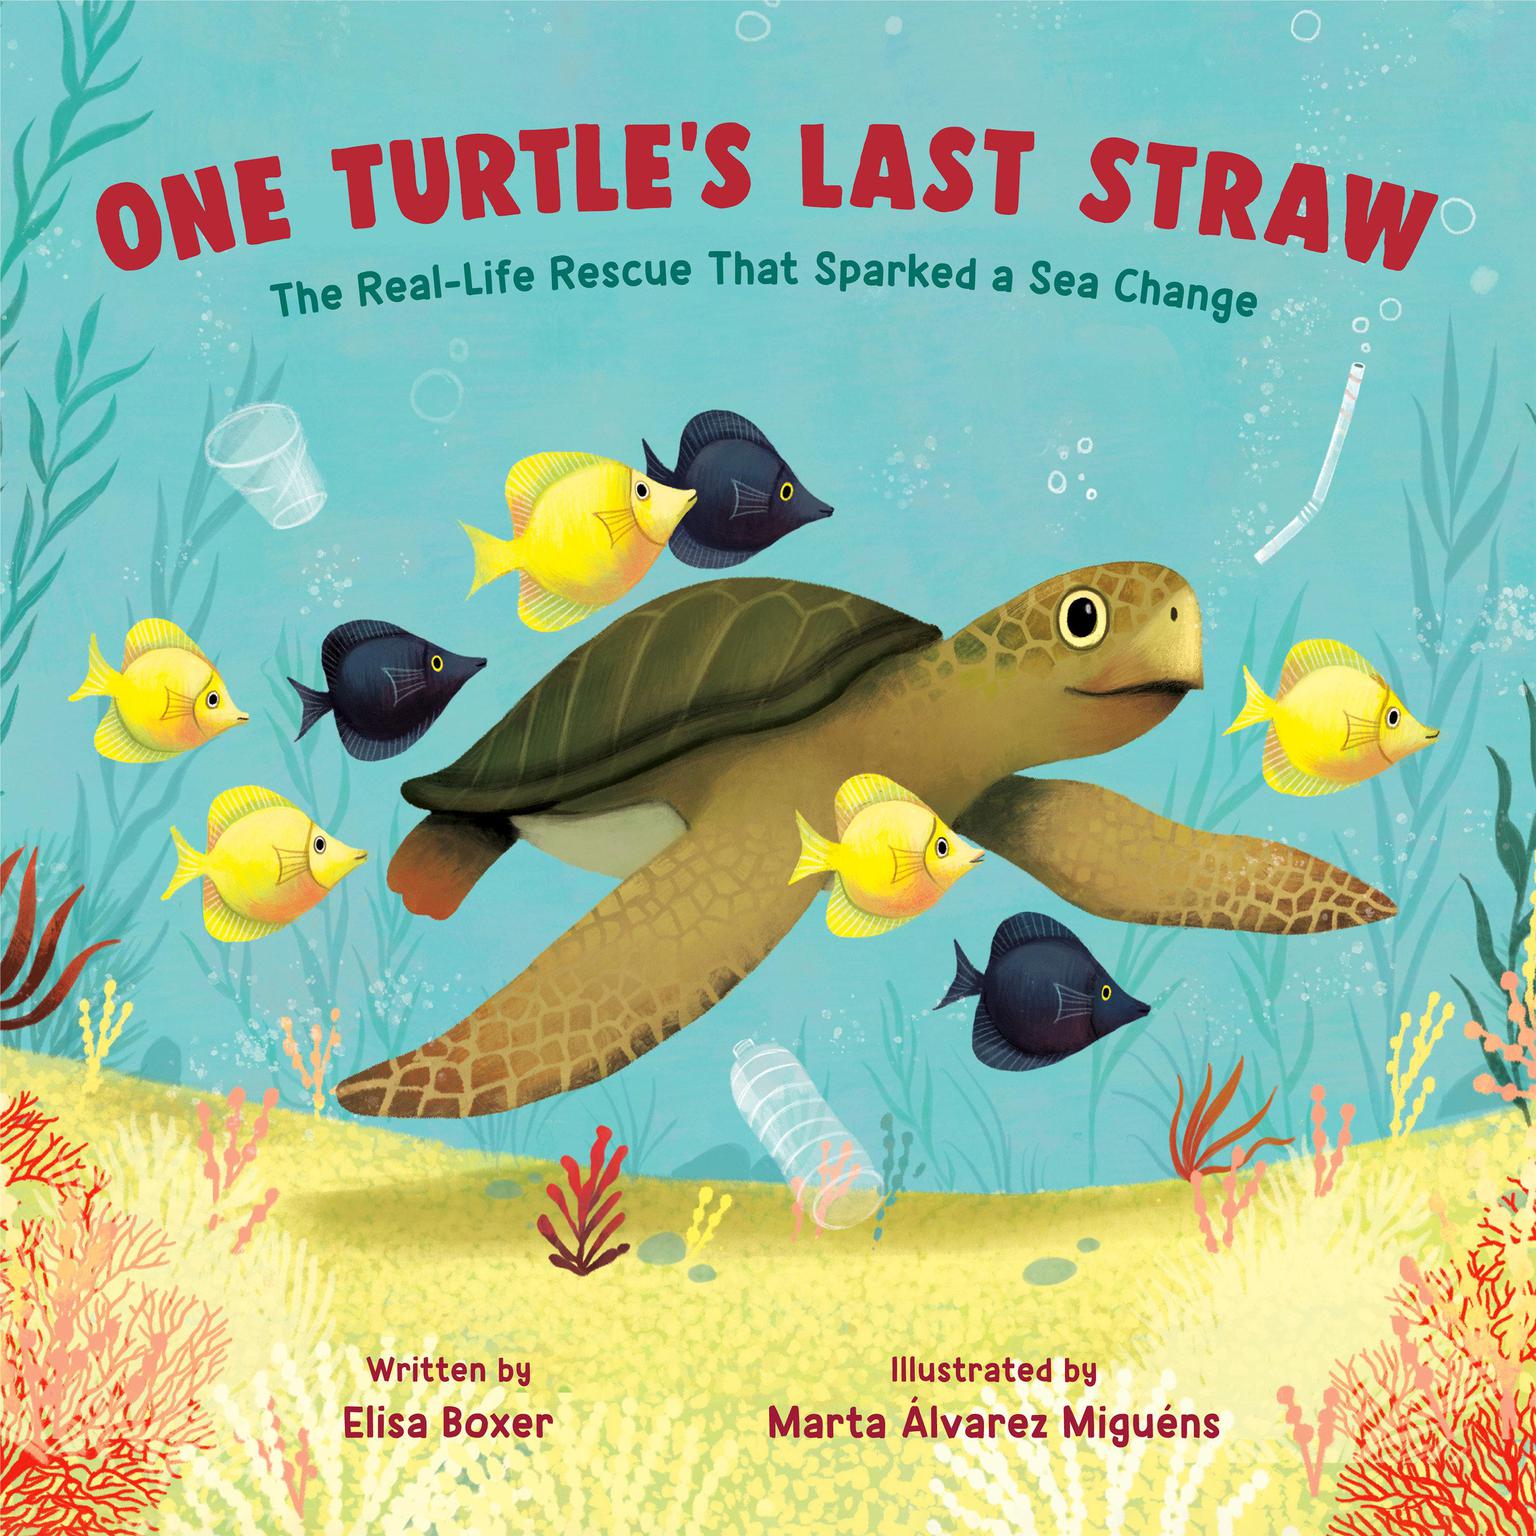 One Turtles Last Straw: The Real-Life Rescue That Sparked a Sea Change Audiobook, by Elisa Boxer